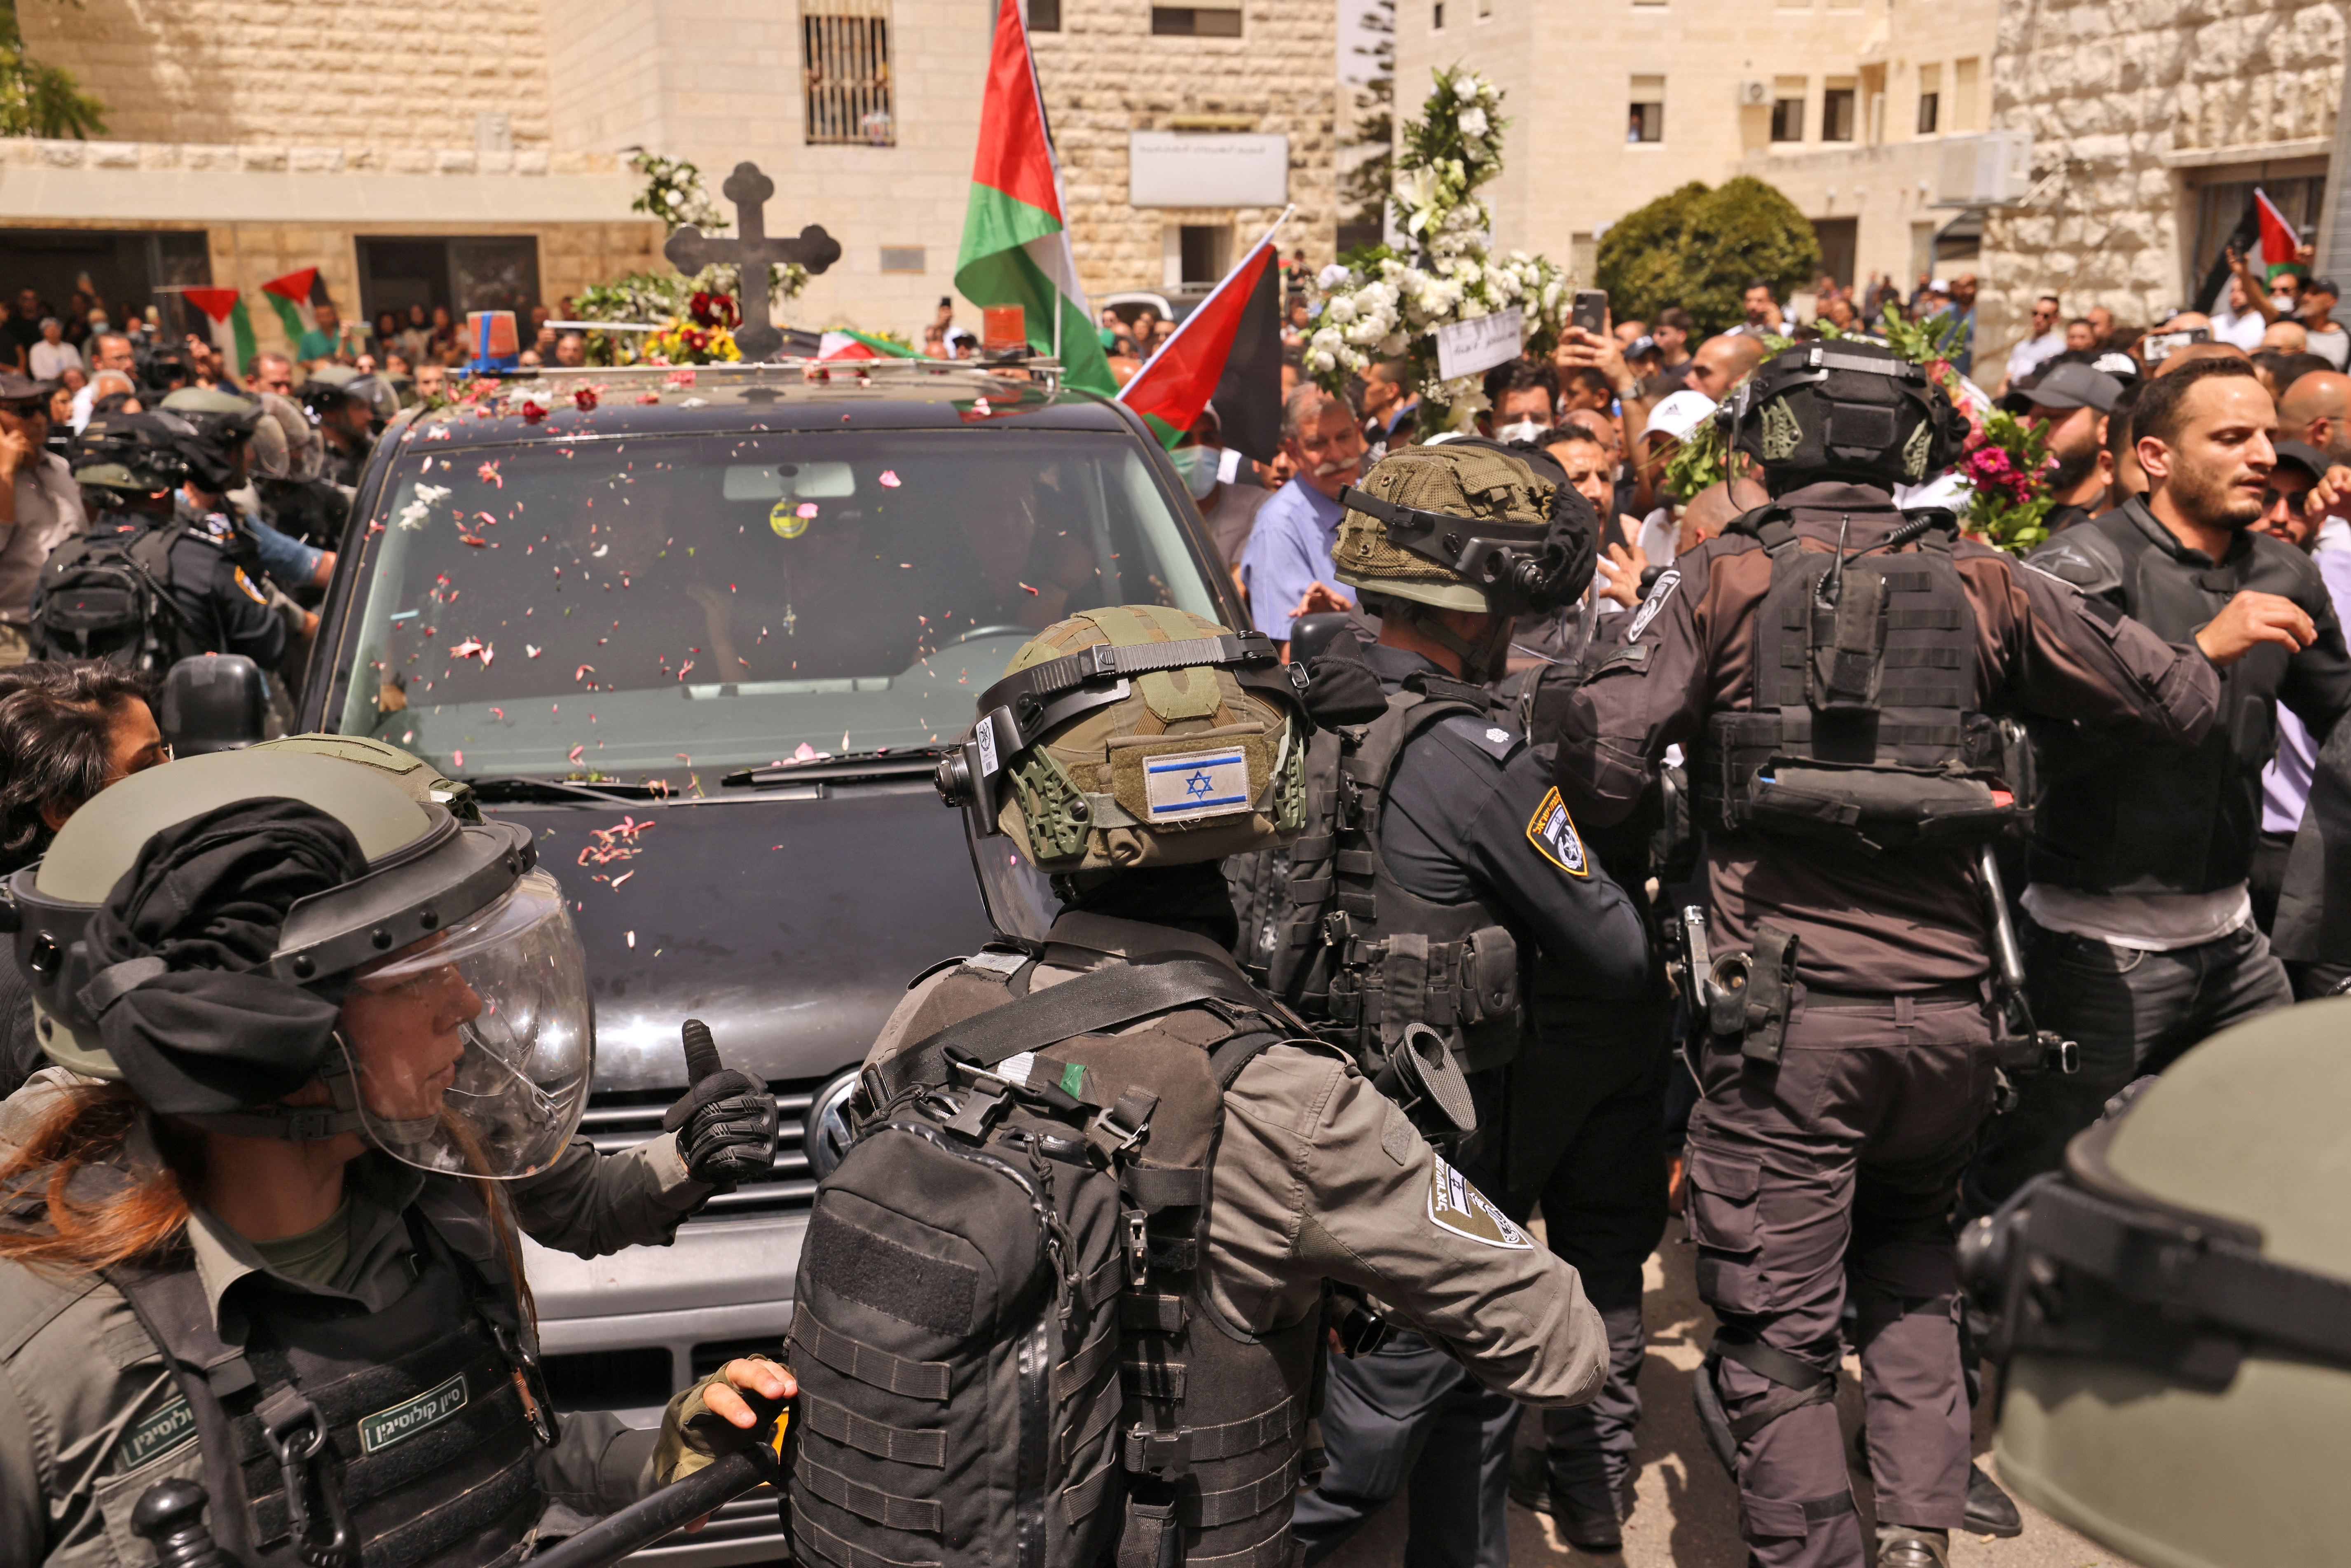 Israeli security forces surround a vehicle carrying the casket of slain Al-Jazeera journalist Shireen Abu Akle out of a hospital, as Palestinian mourners toss rose petals, before being transported to a church and then her resting place, in Jerusalem, on May 13, 2022. - Abu Akleh, who was shot dead on May 11, 2022 while covering a raid in the Israeli-occupied West Bank, was among Arab media's most prominent figures and widely hailed for her bravery and professionalism. (Photo by AHMAD GHARABLI / AFP)